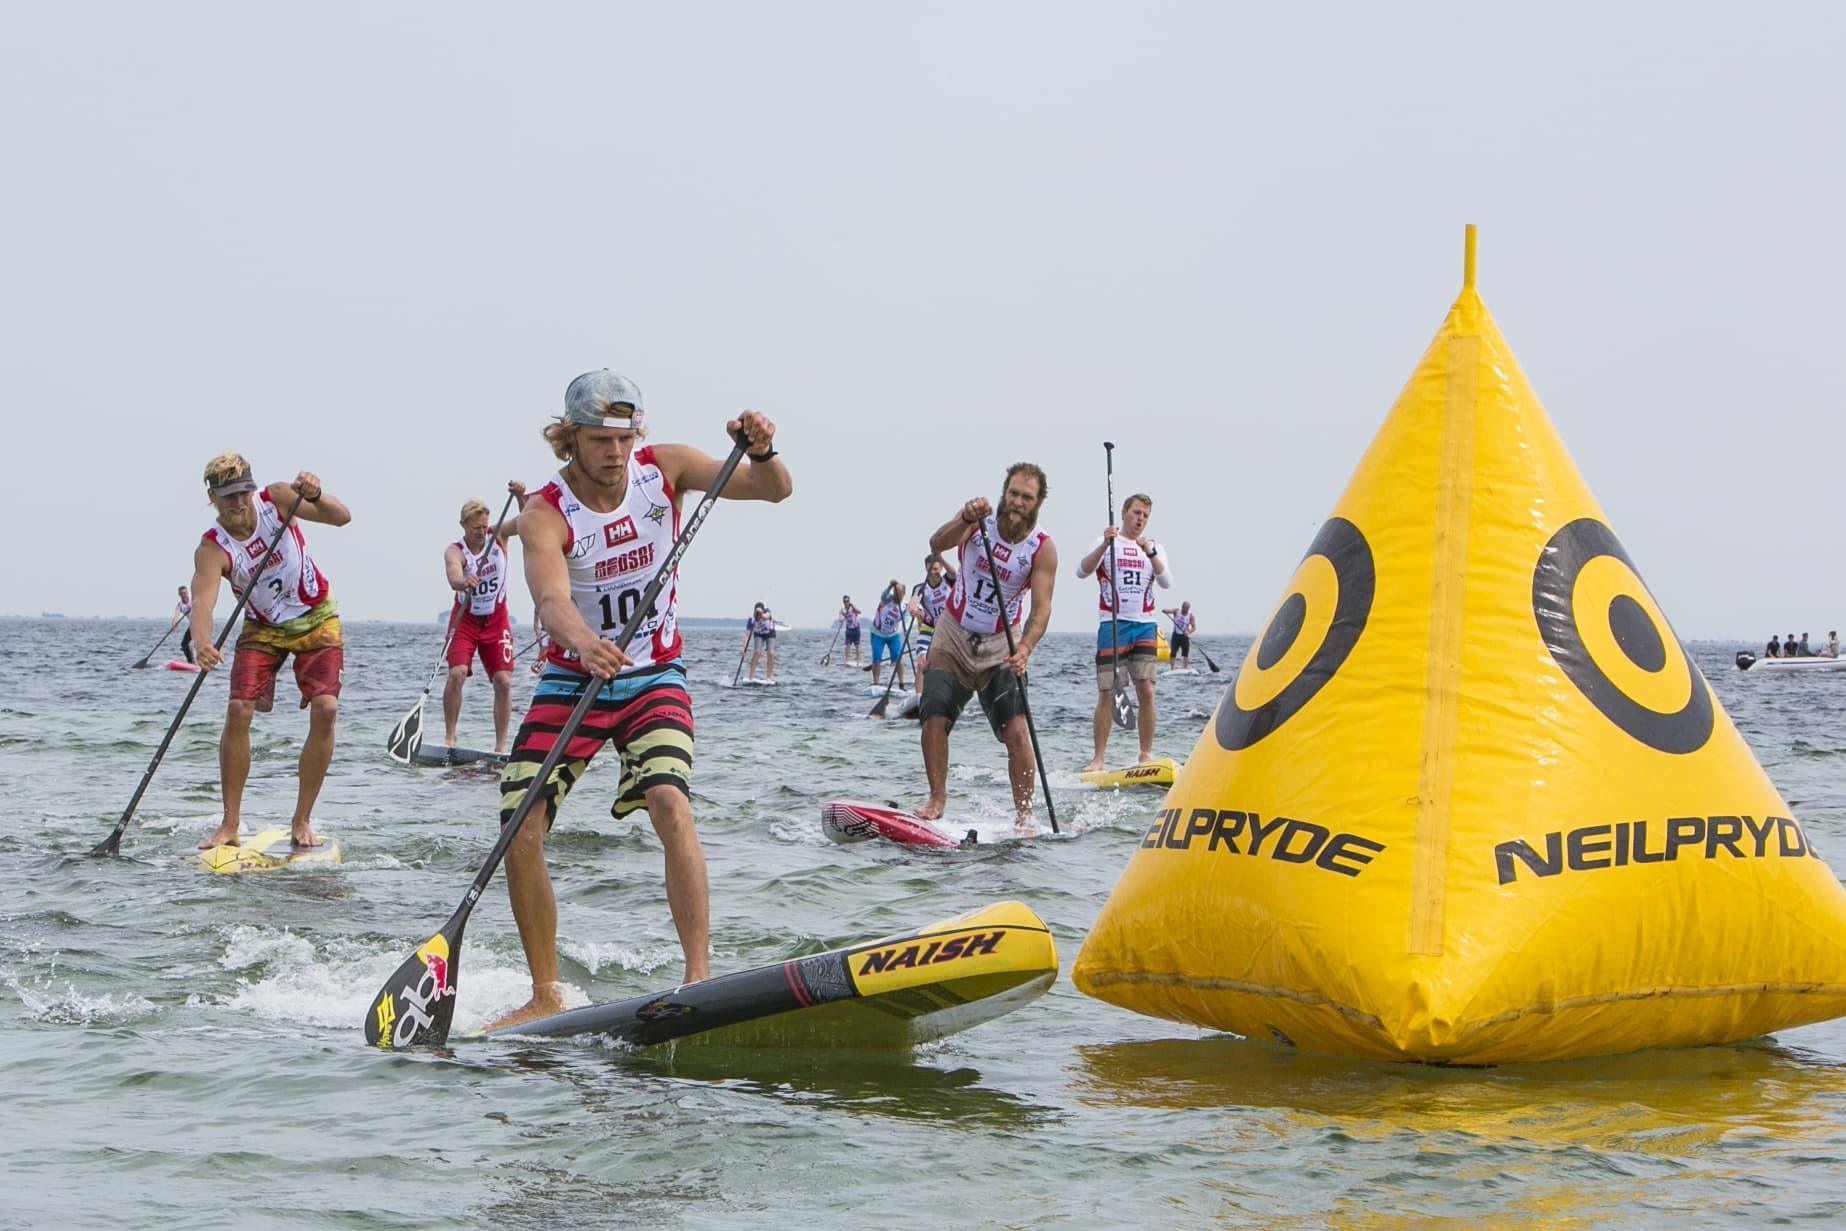 Casper Steinfath Holds the Crown at the Denmark National SUP Race Championship - Naish.com